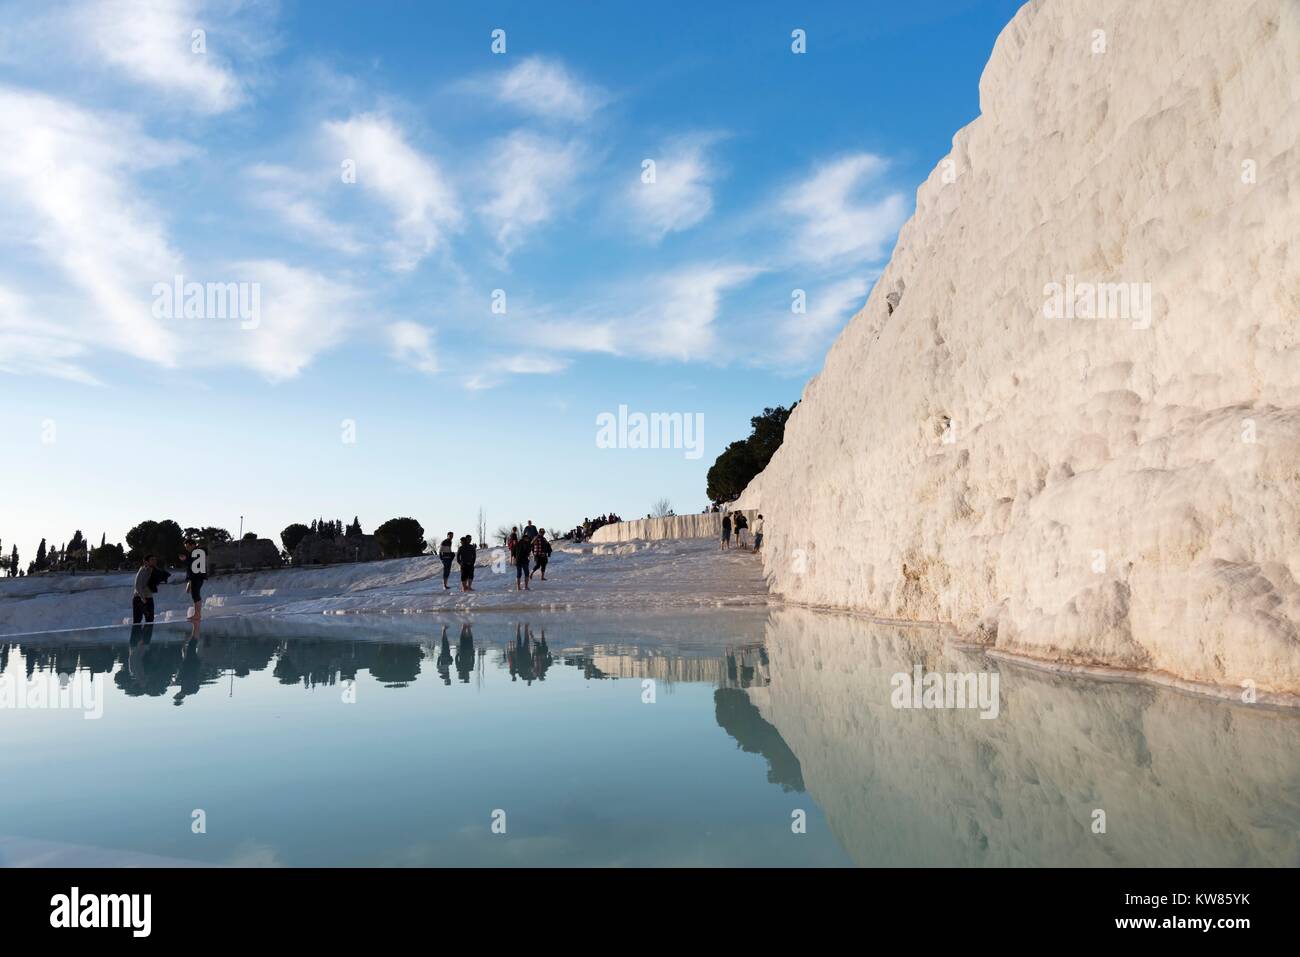 JANUARY 24; 2015 PAMUKKALE Pamukkale,is a natural site in Denizli Province in southwestern Turkey. Unidentified visitors are walks on travertines. Stock Photo